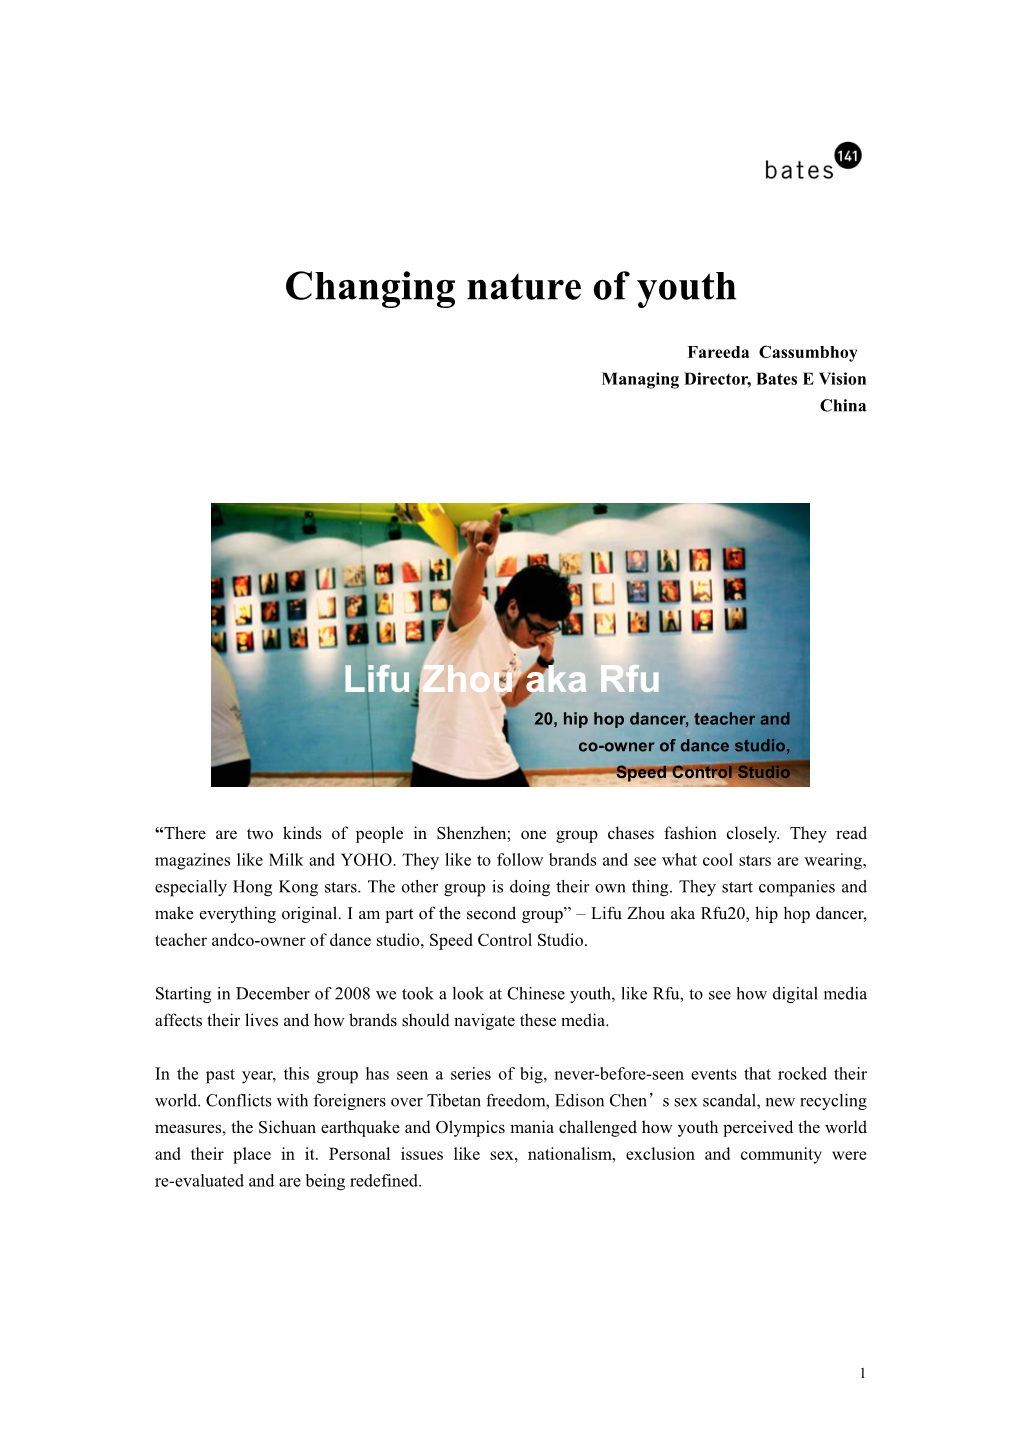 Changing Nature of Youth